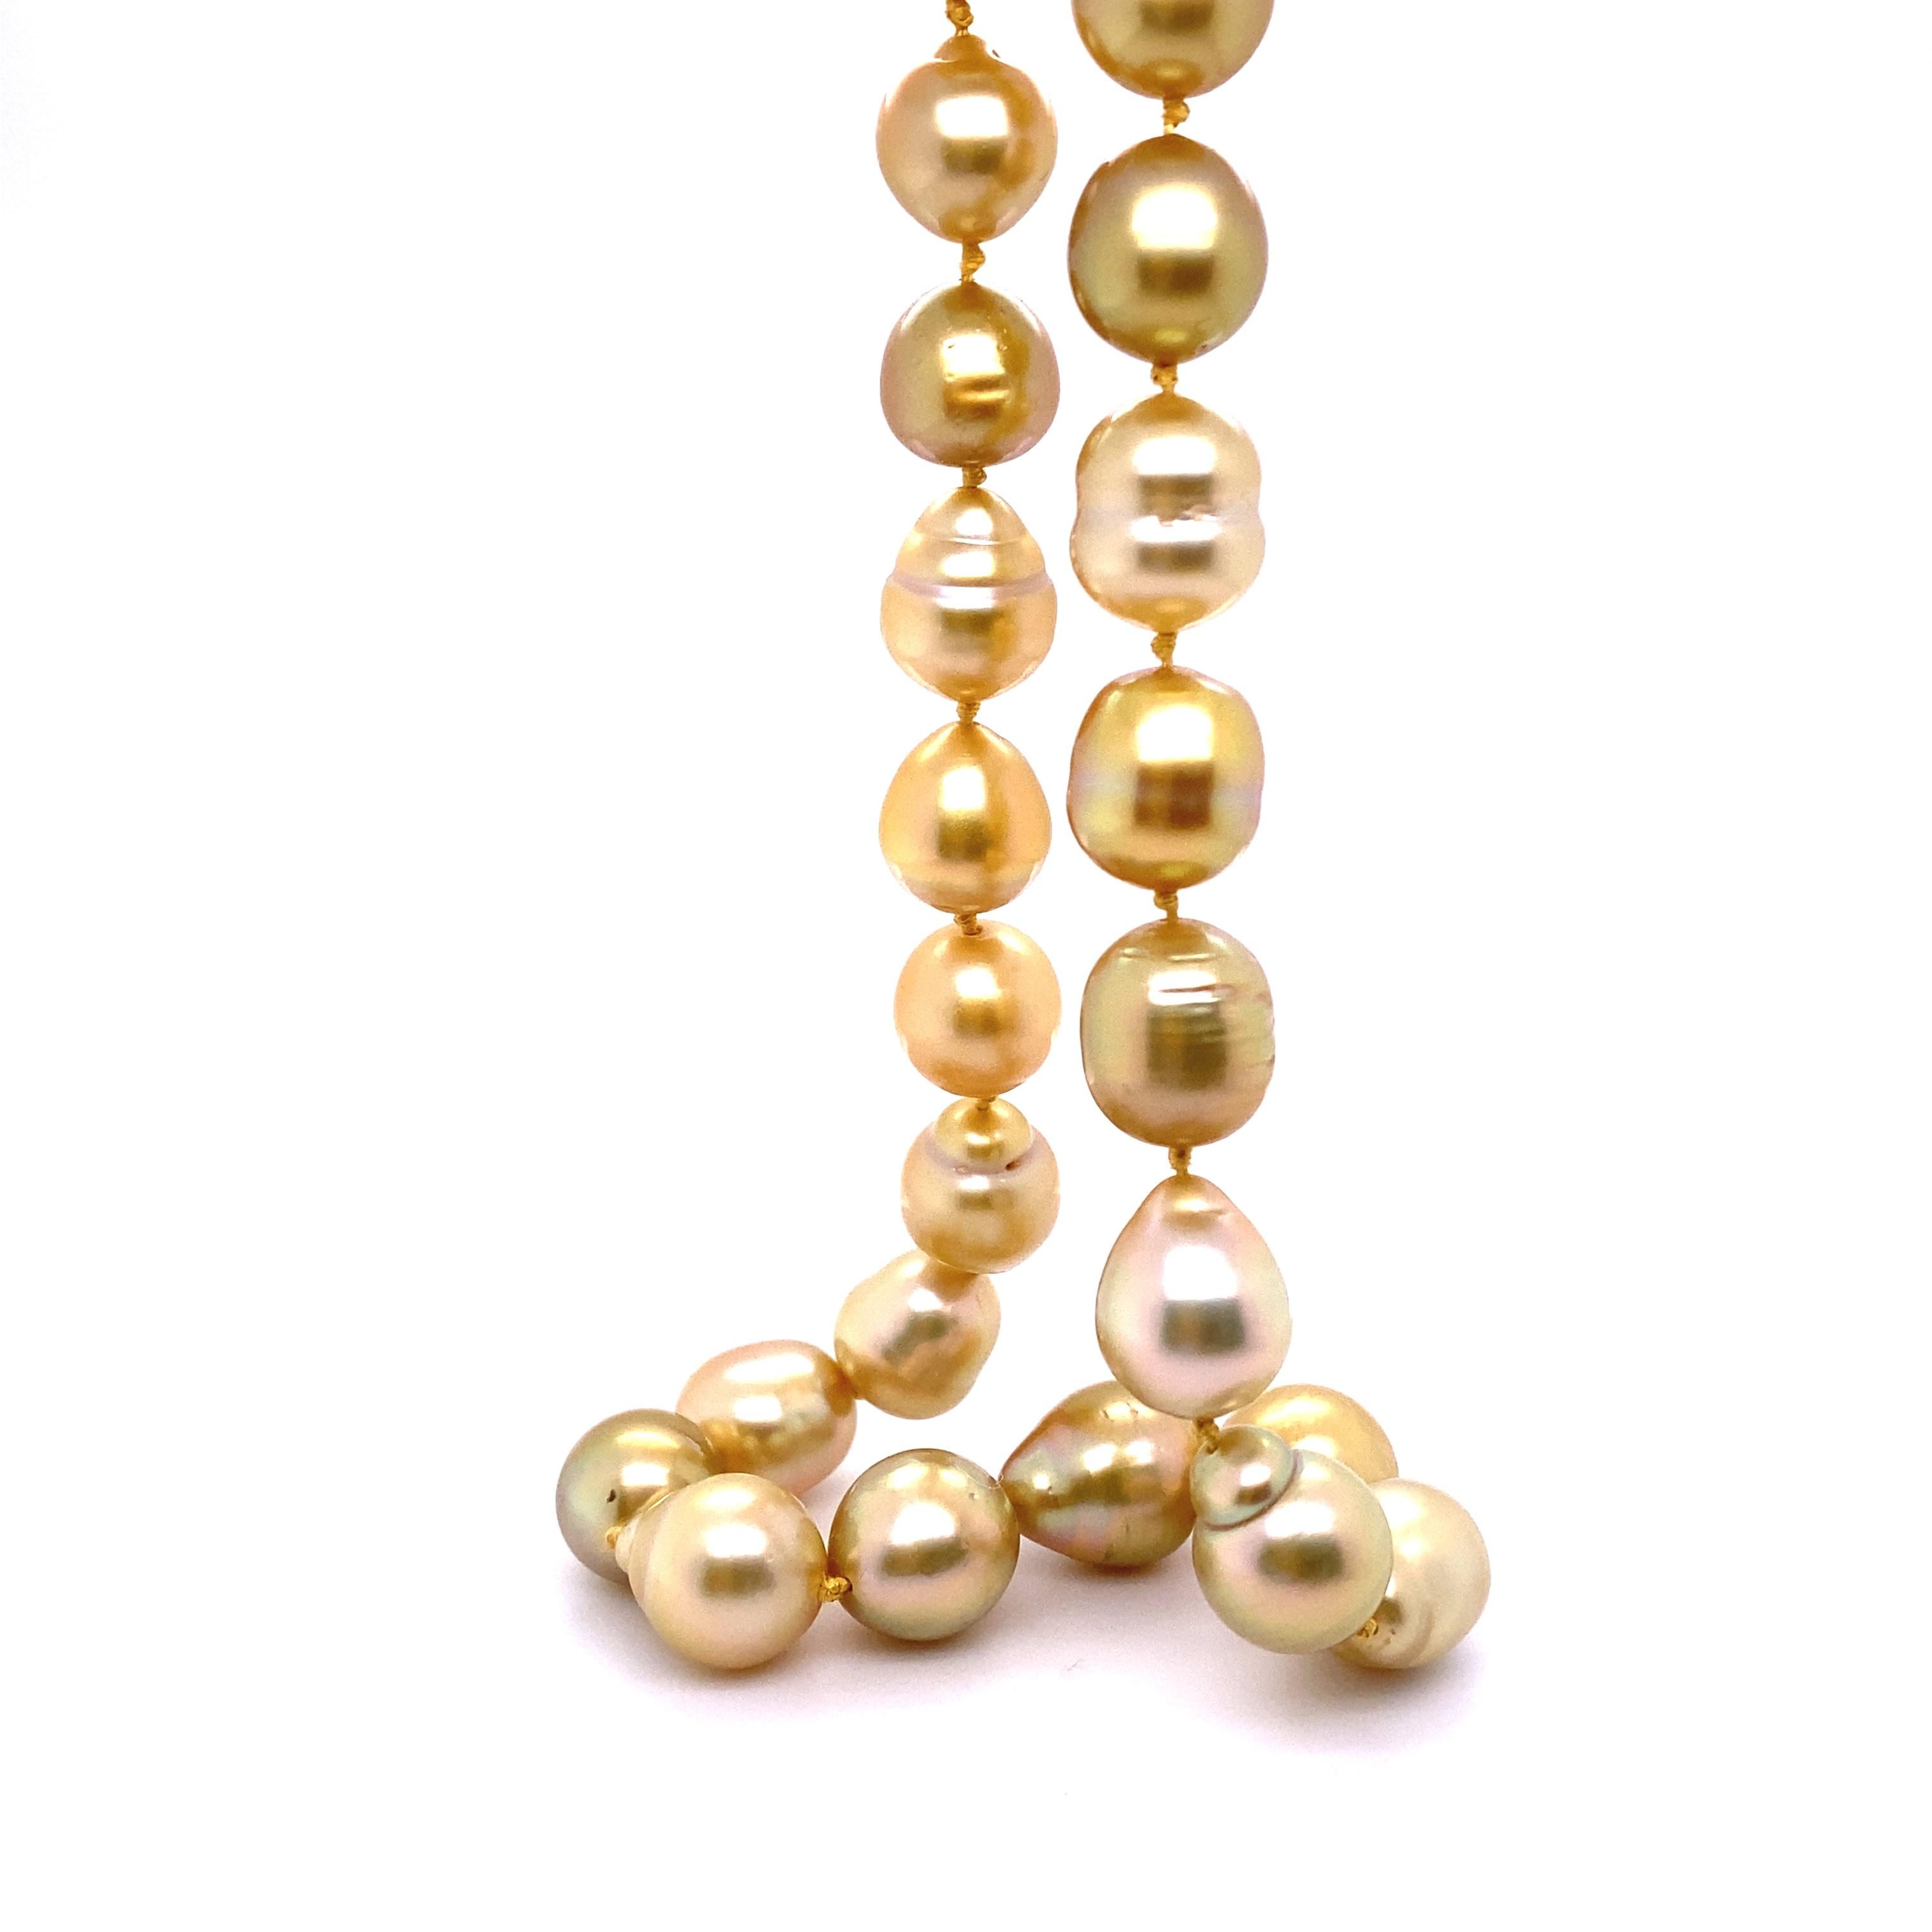 Natural, Golden Yellow Baroque Pearls Strand Necklace, 14K Gold Clasp In New Condition For Sale In Bozeman, MT